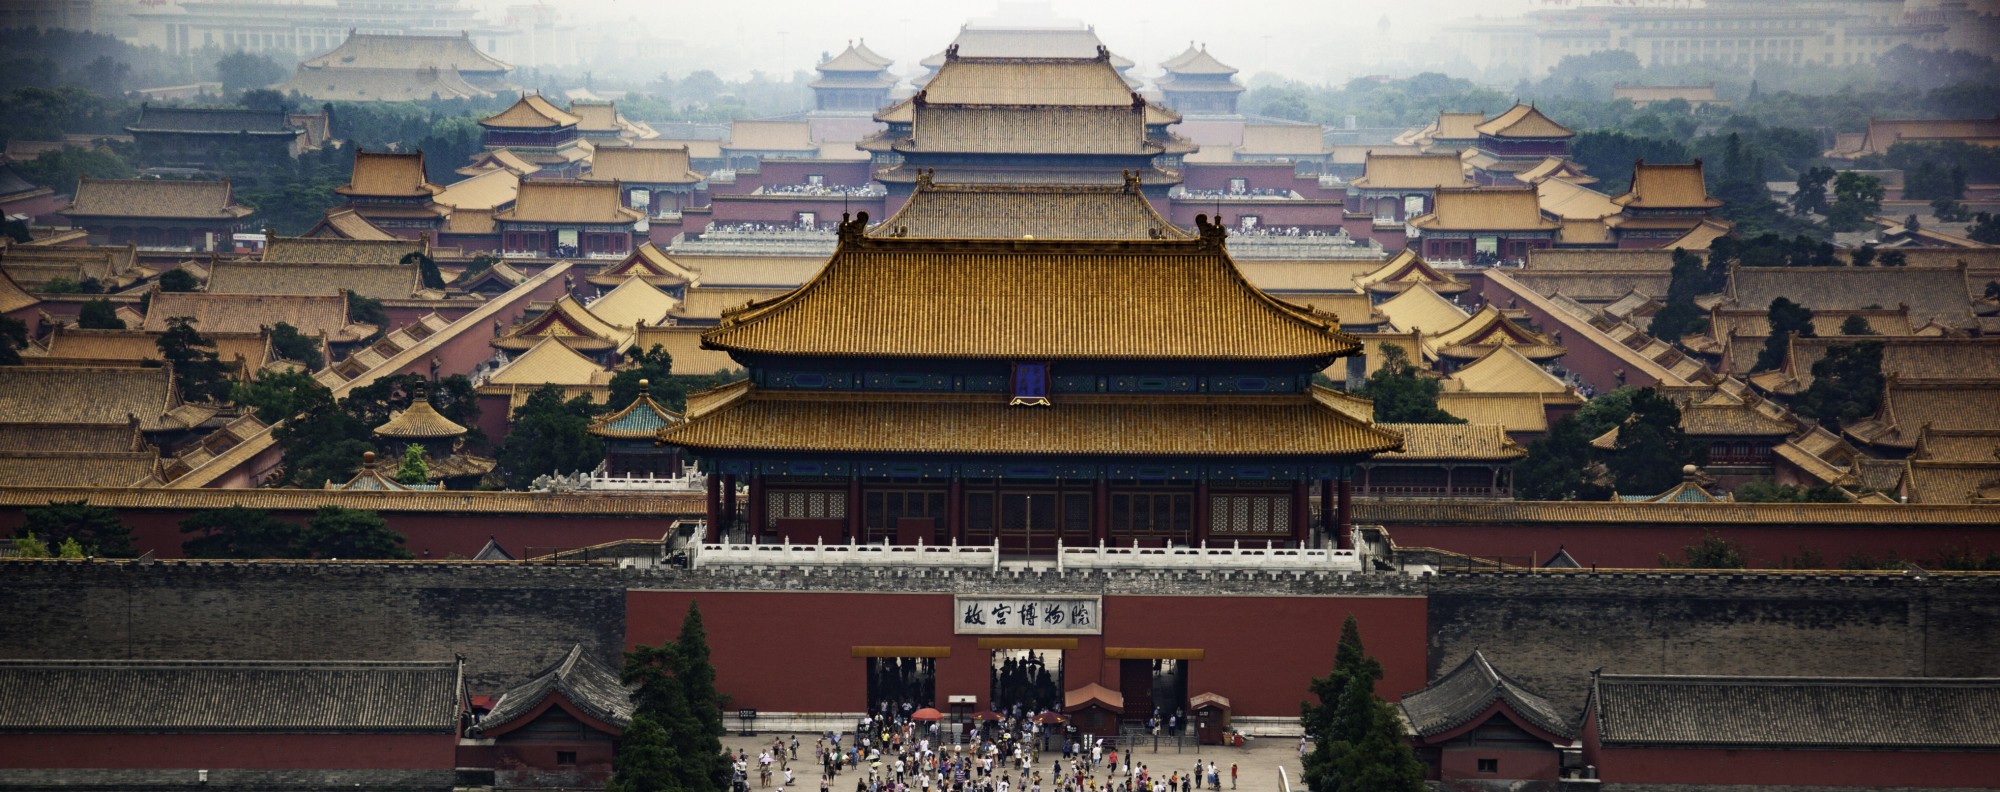 Will Beijing earn Unesco World Heritage listing for much changed old city?